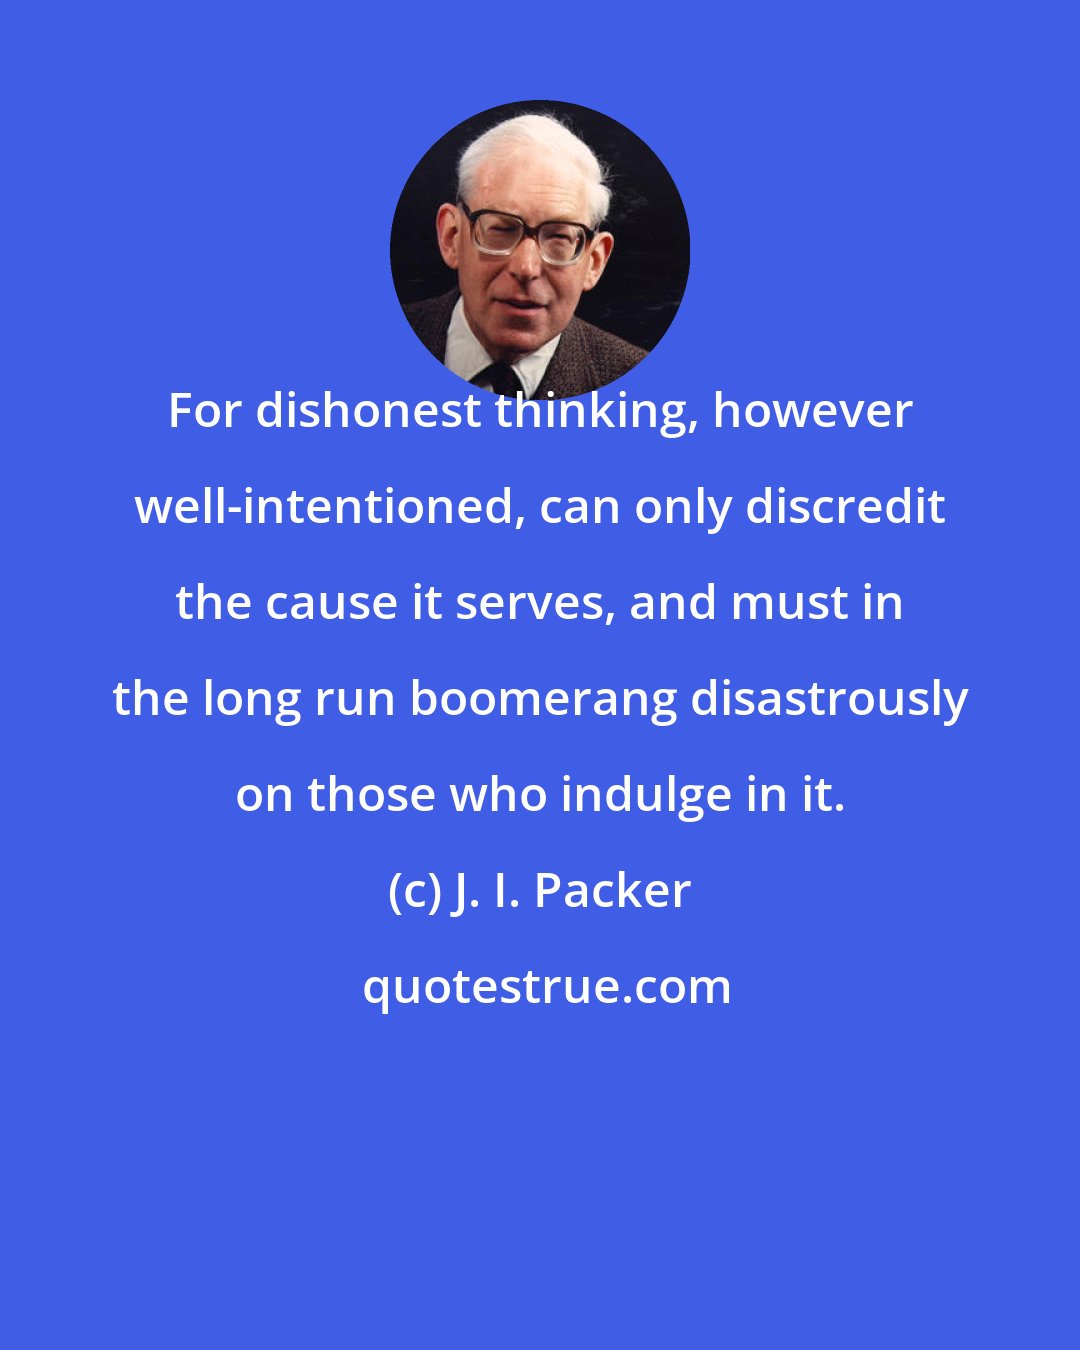 J. I. Packer: For dishonest thinking, however well-intentioned, can only discredit the cause it serves, and must in the long run boomerang disastrously on those who indulge in it.